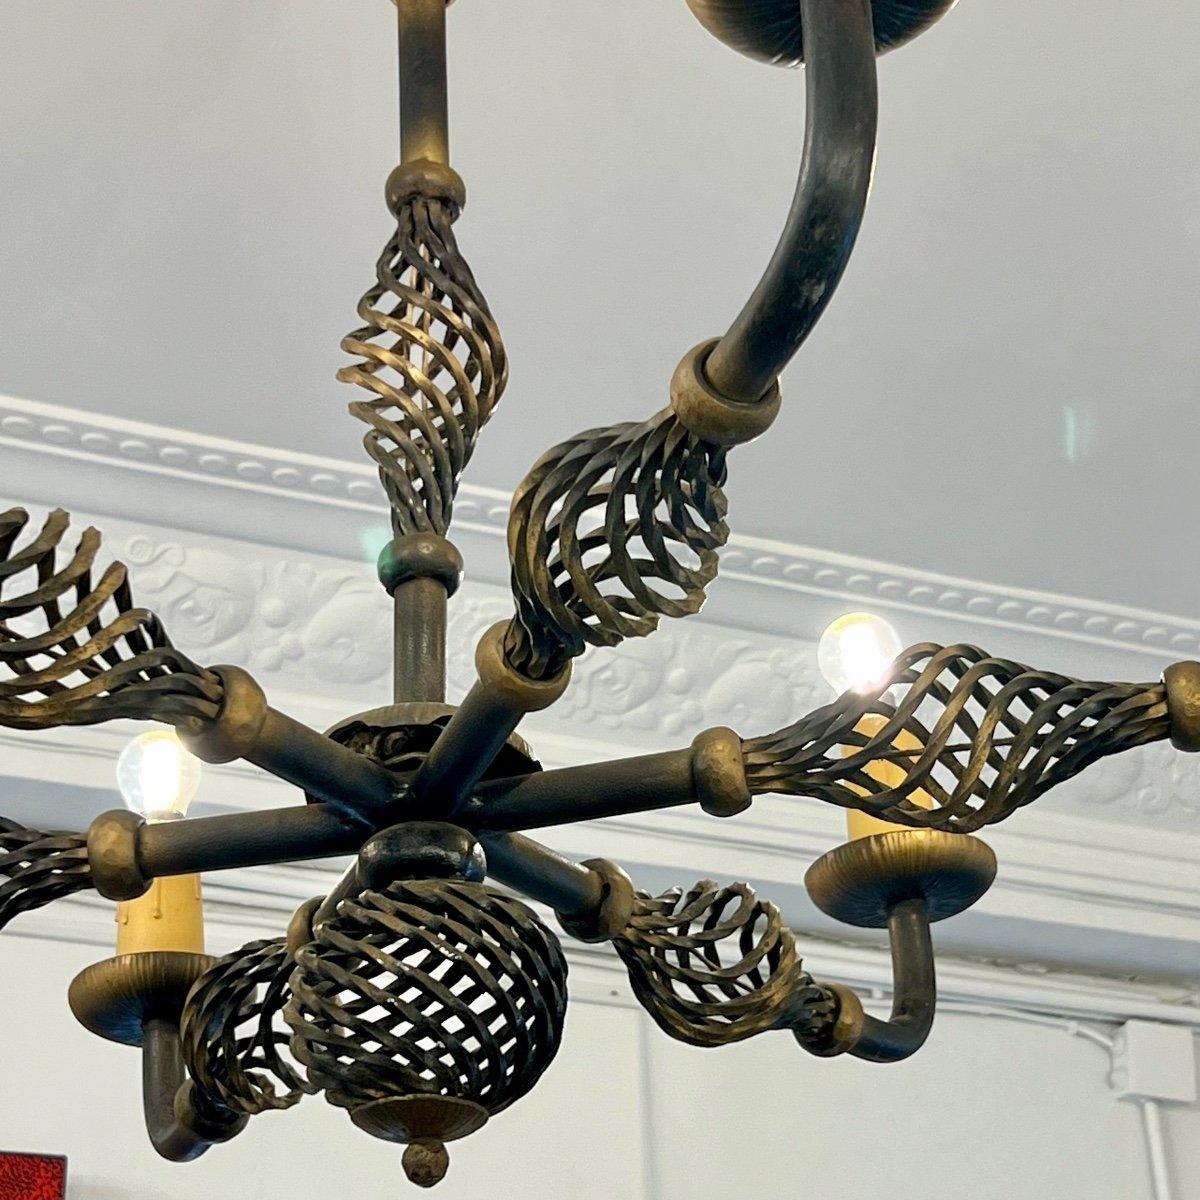 20th Century Art Deco Wrought Iron Chandelier with Six Arms, 1940 For Sale